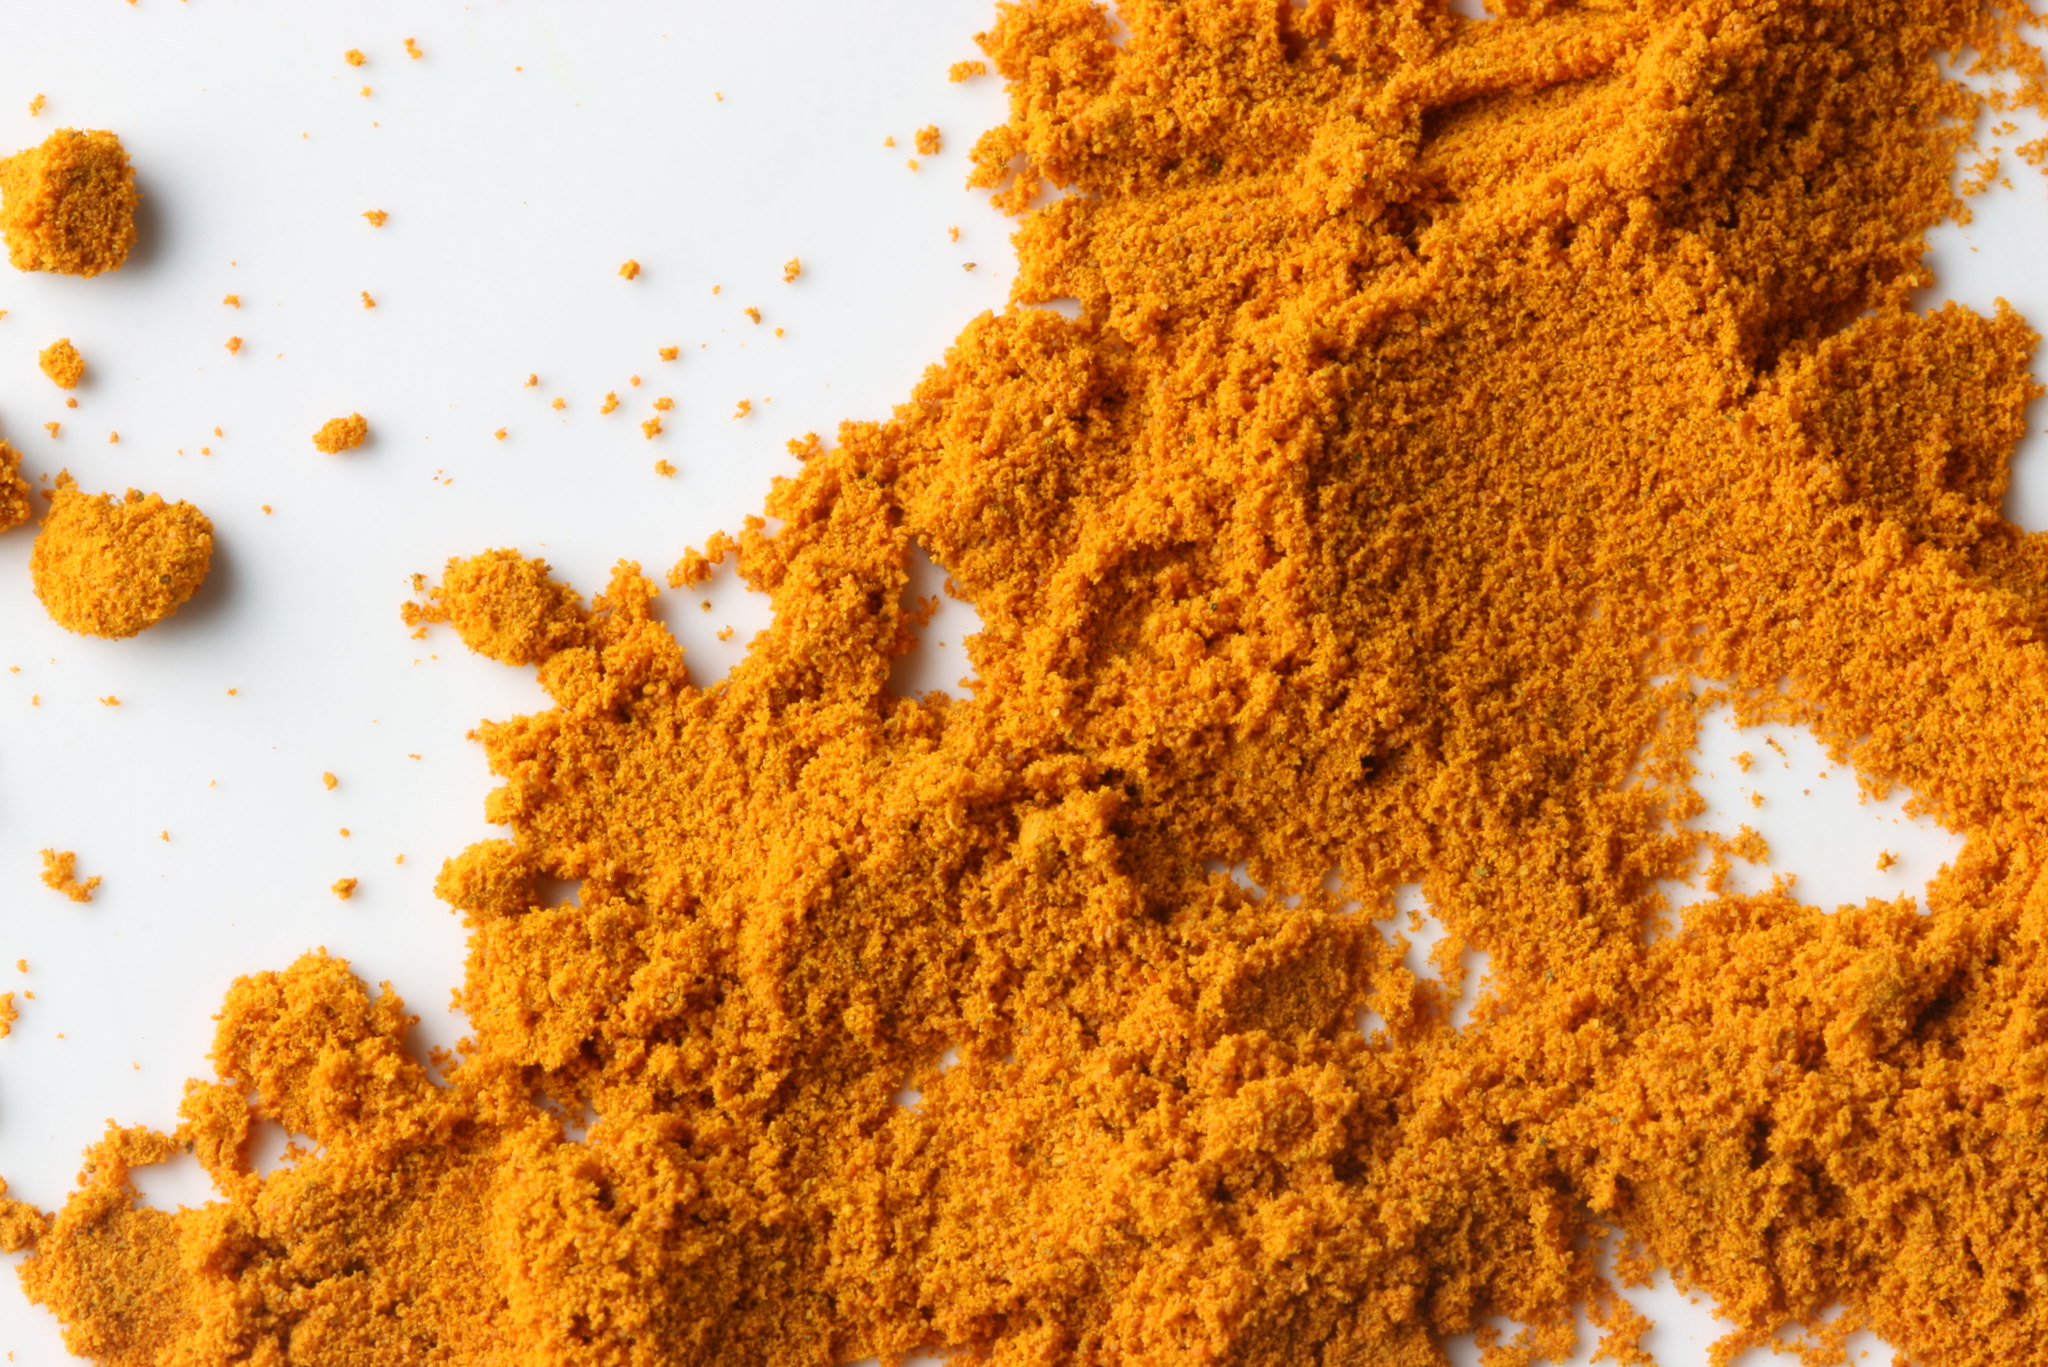 Bright orange-yellow powder scattered on a white surface